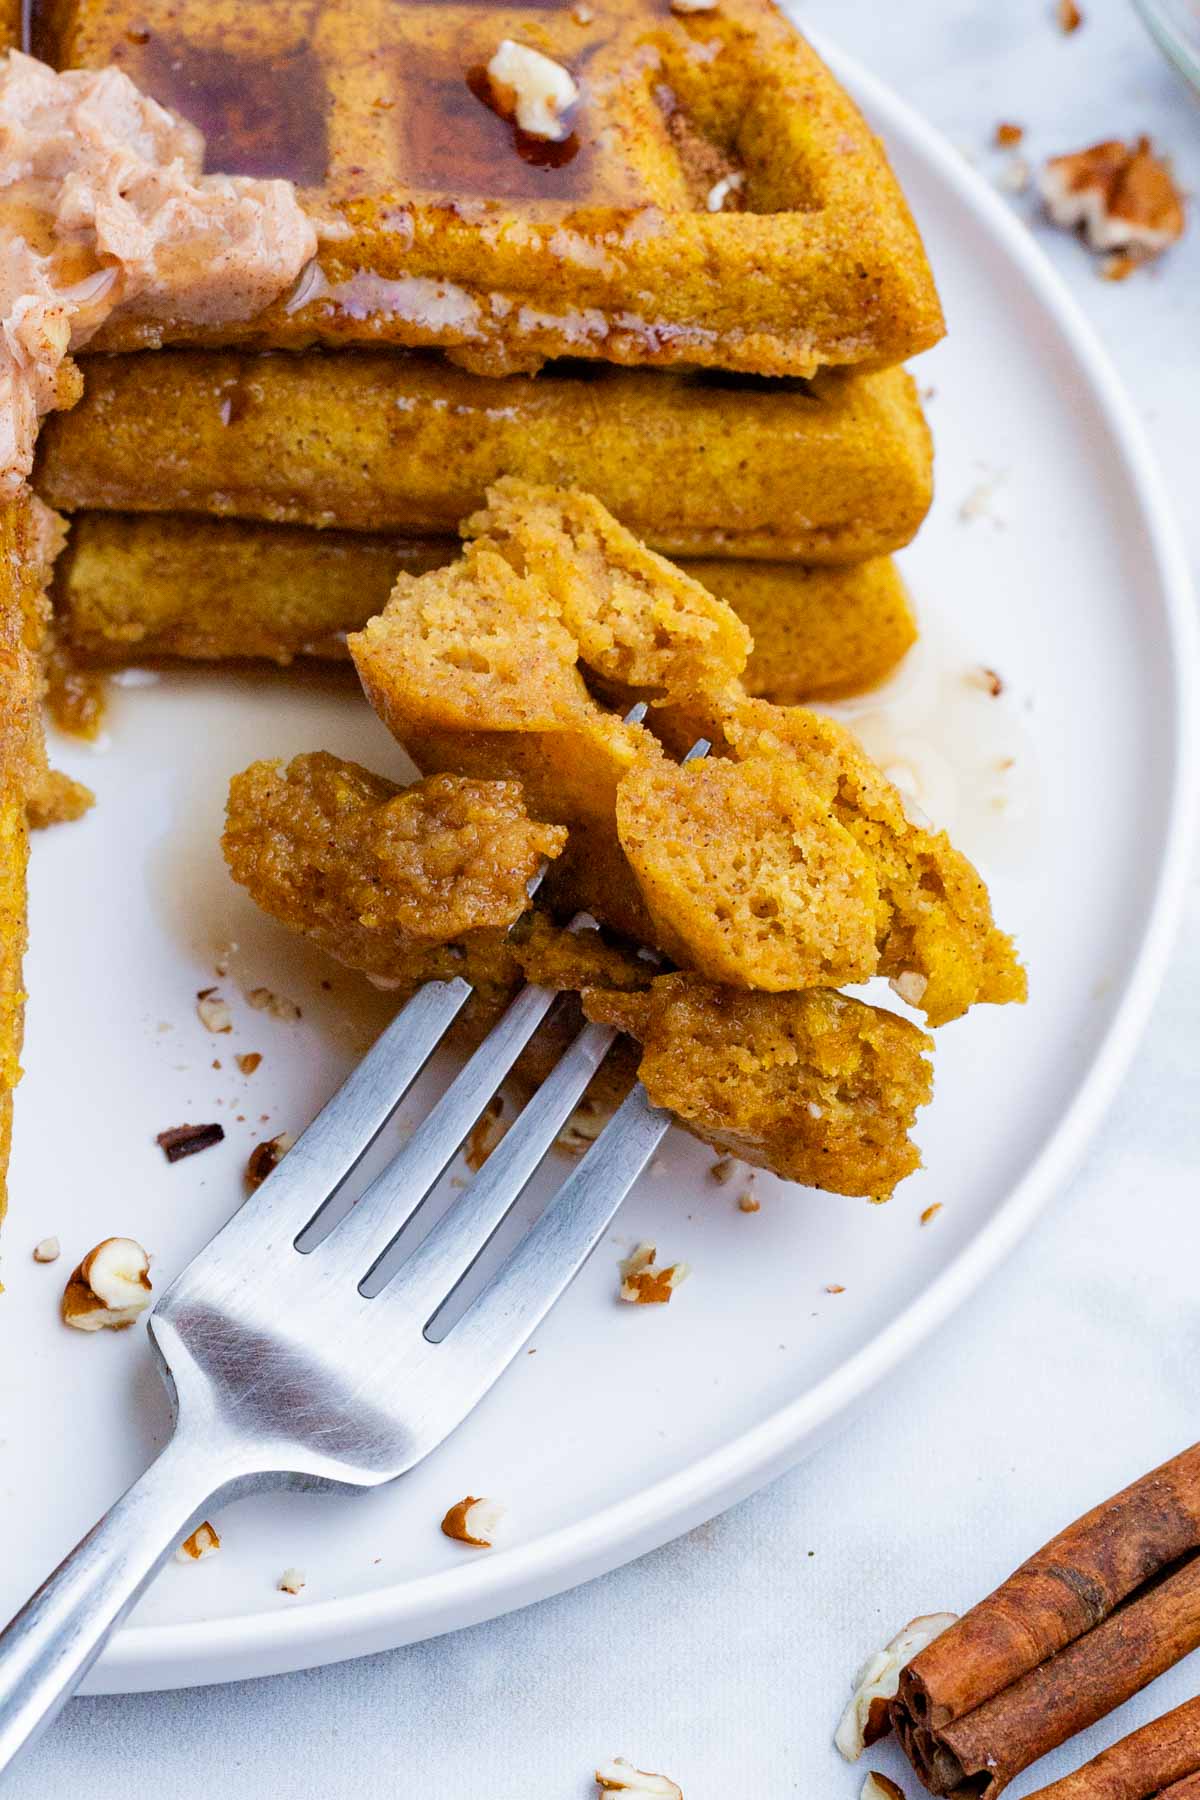 Pumpkin waffles are sliced into bite-sized pieces before enjoying.